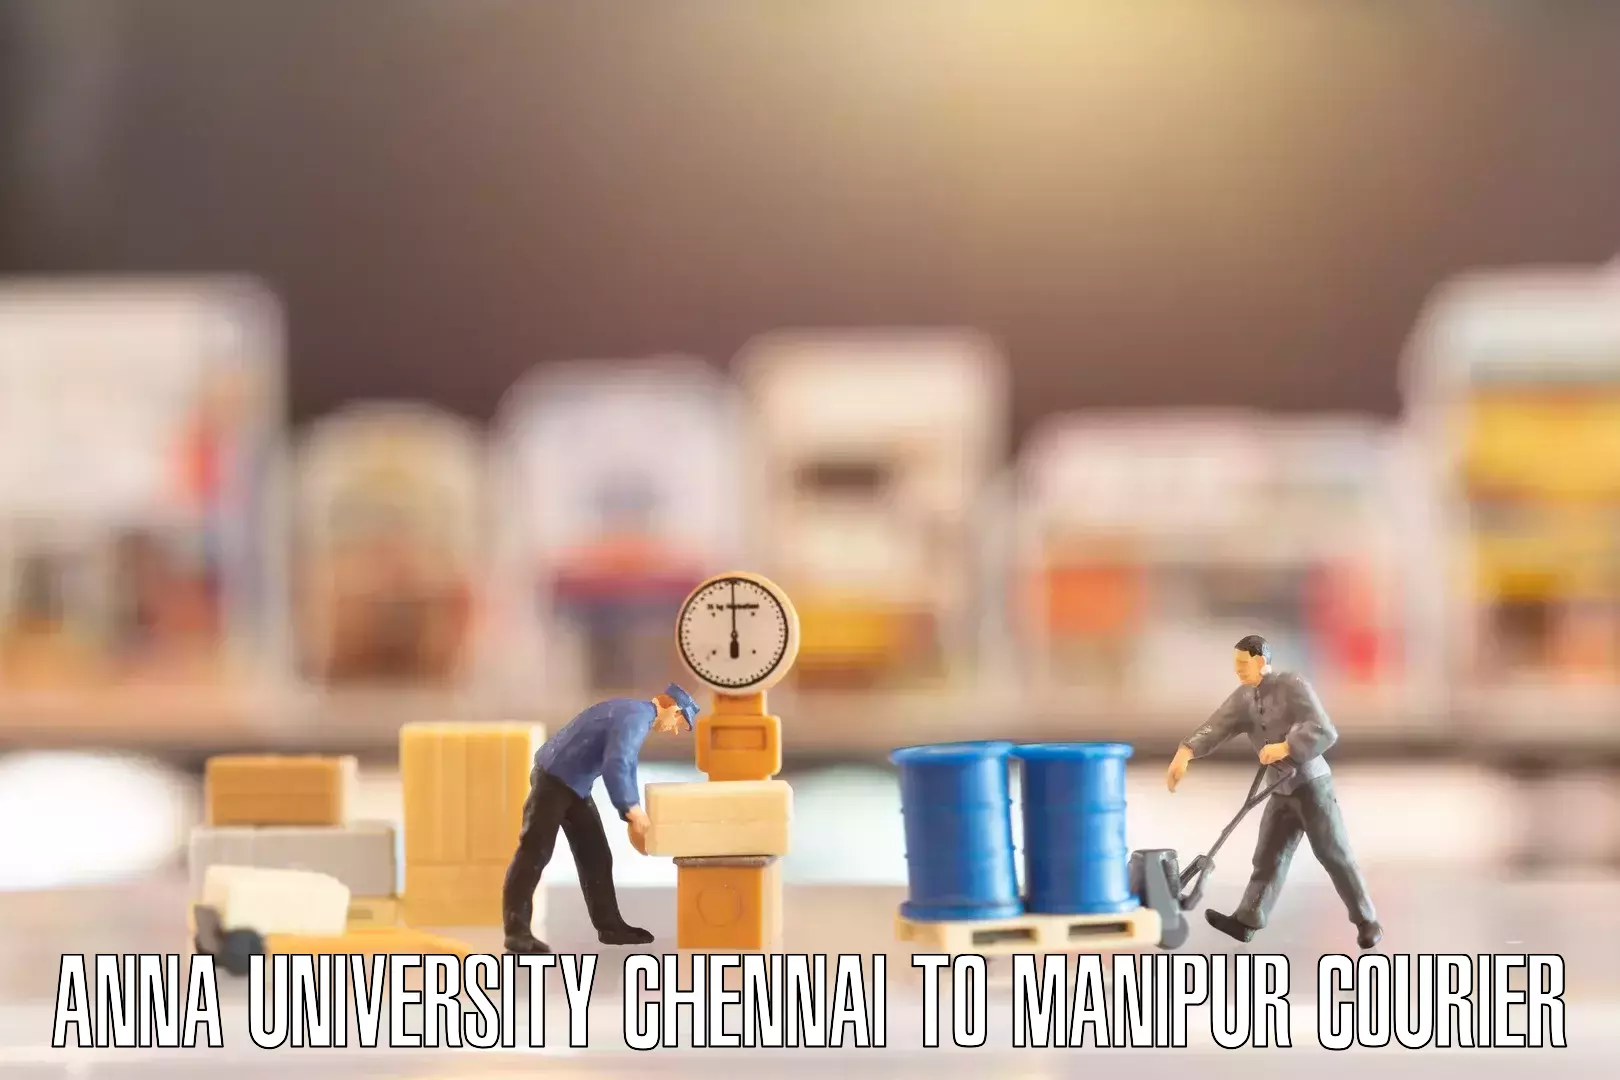 Trusted relocation experts Anna University Chennai to Ukhrul